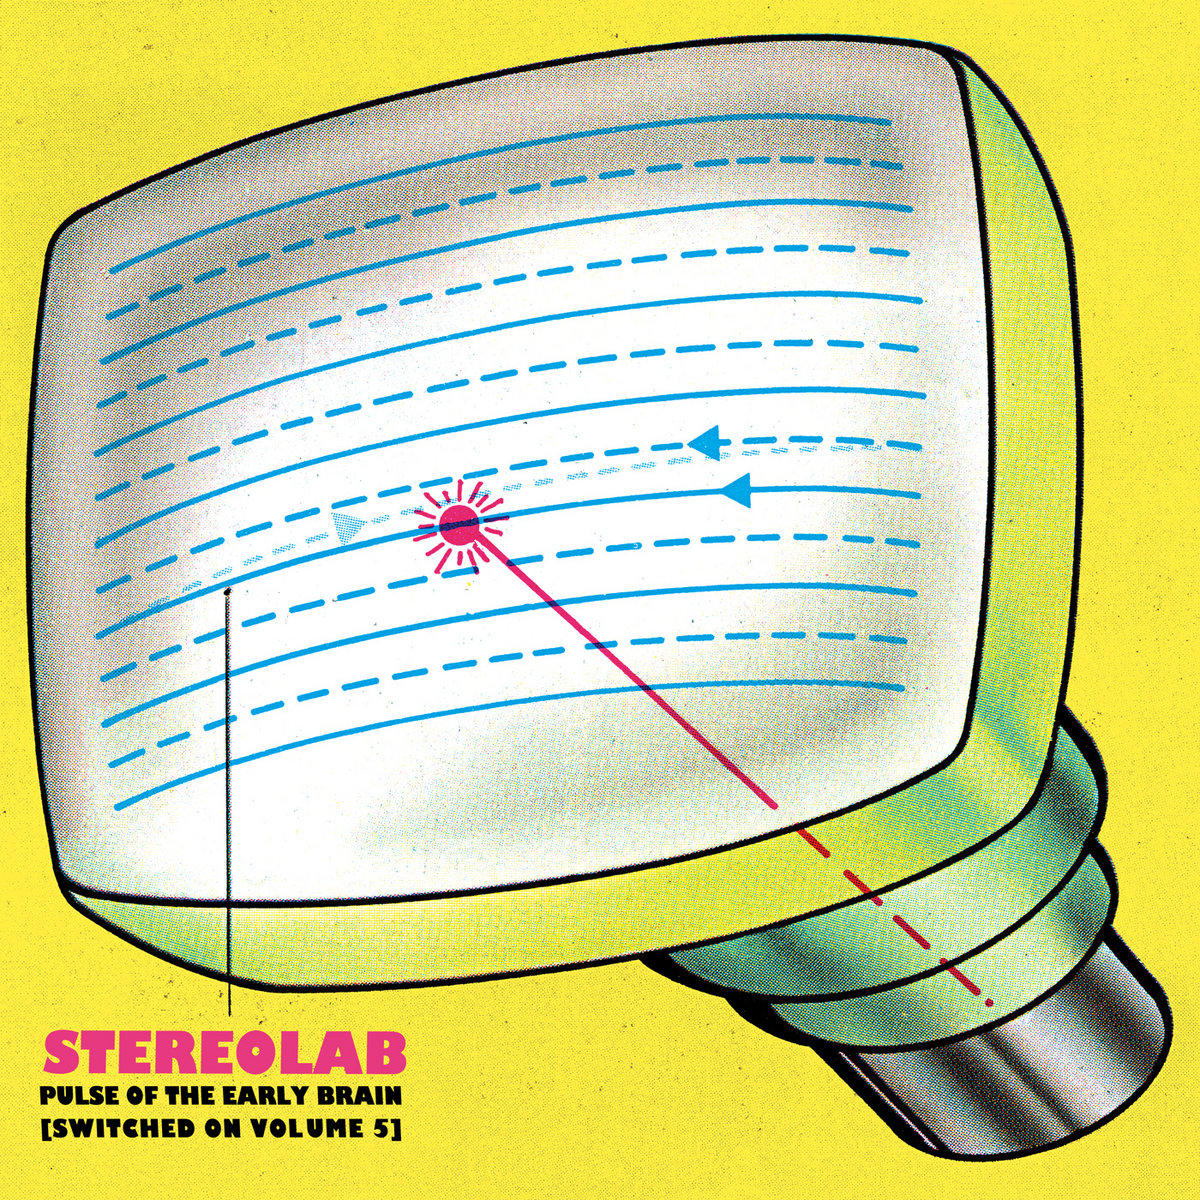 Stereolab - Pulse of the Early Brain [Switched On Vol 5]